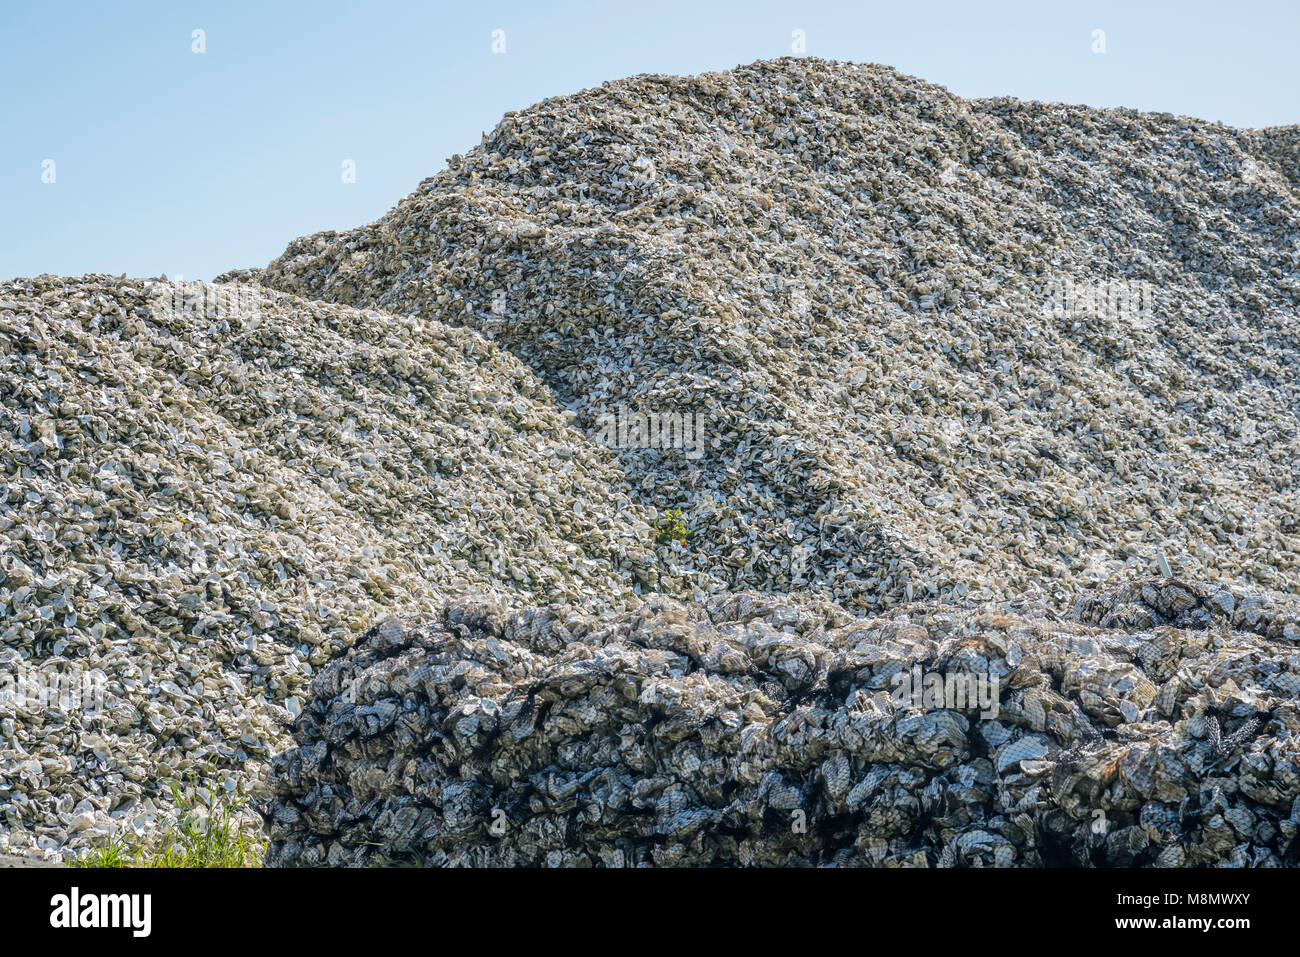 Mounds of oyster shells at Qualman Oyster Farms in Coos Bay, Oregon Stock Photo